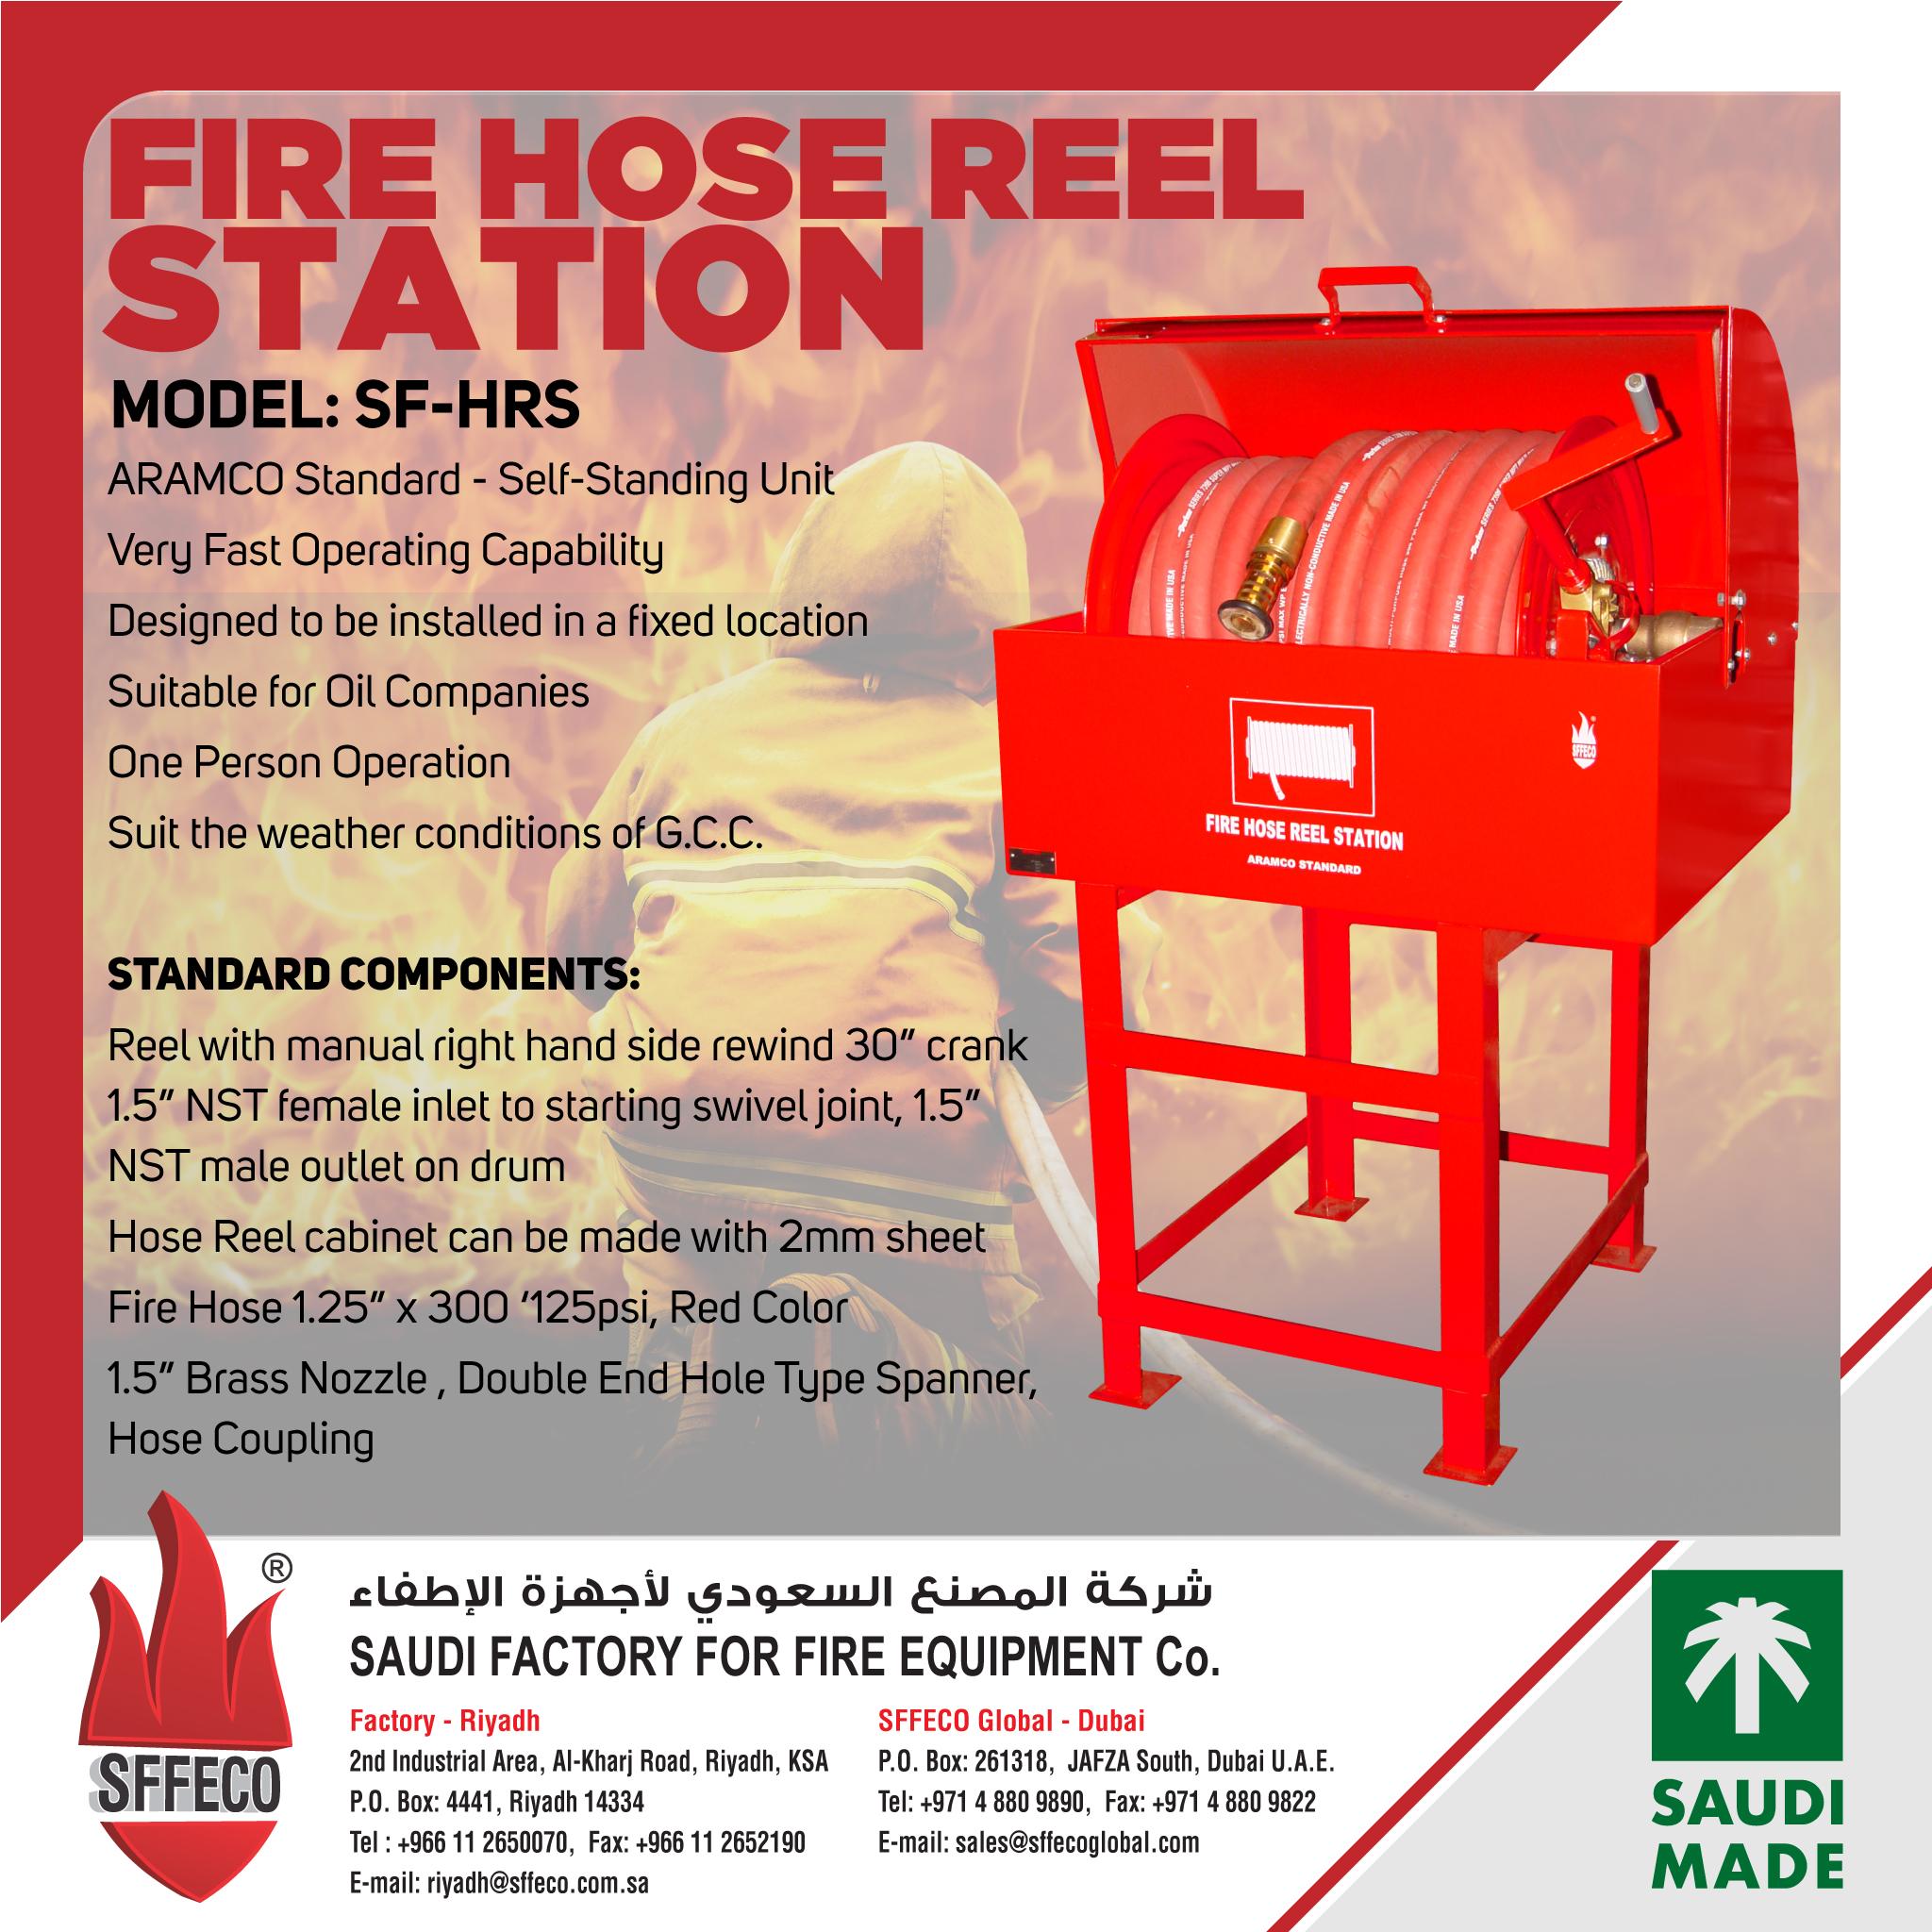 SFFECO on X: The SFFECO Fire Hose Reel Station Unit is a self